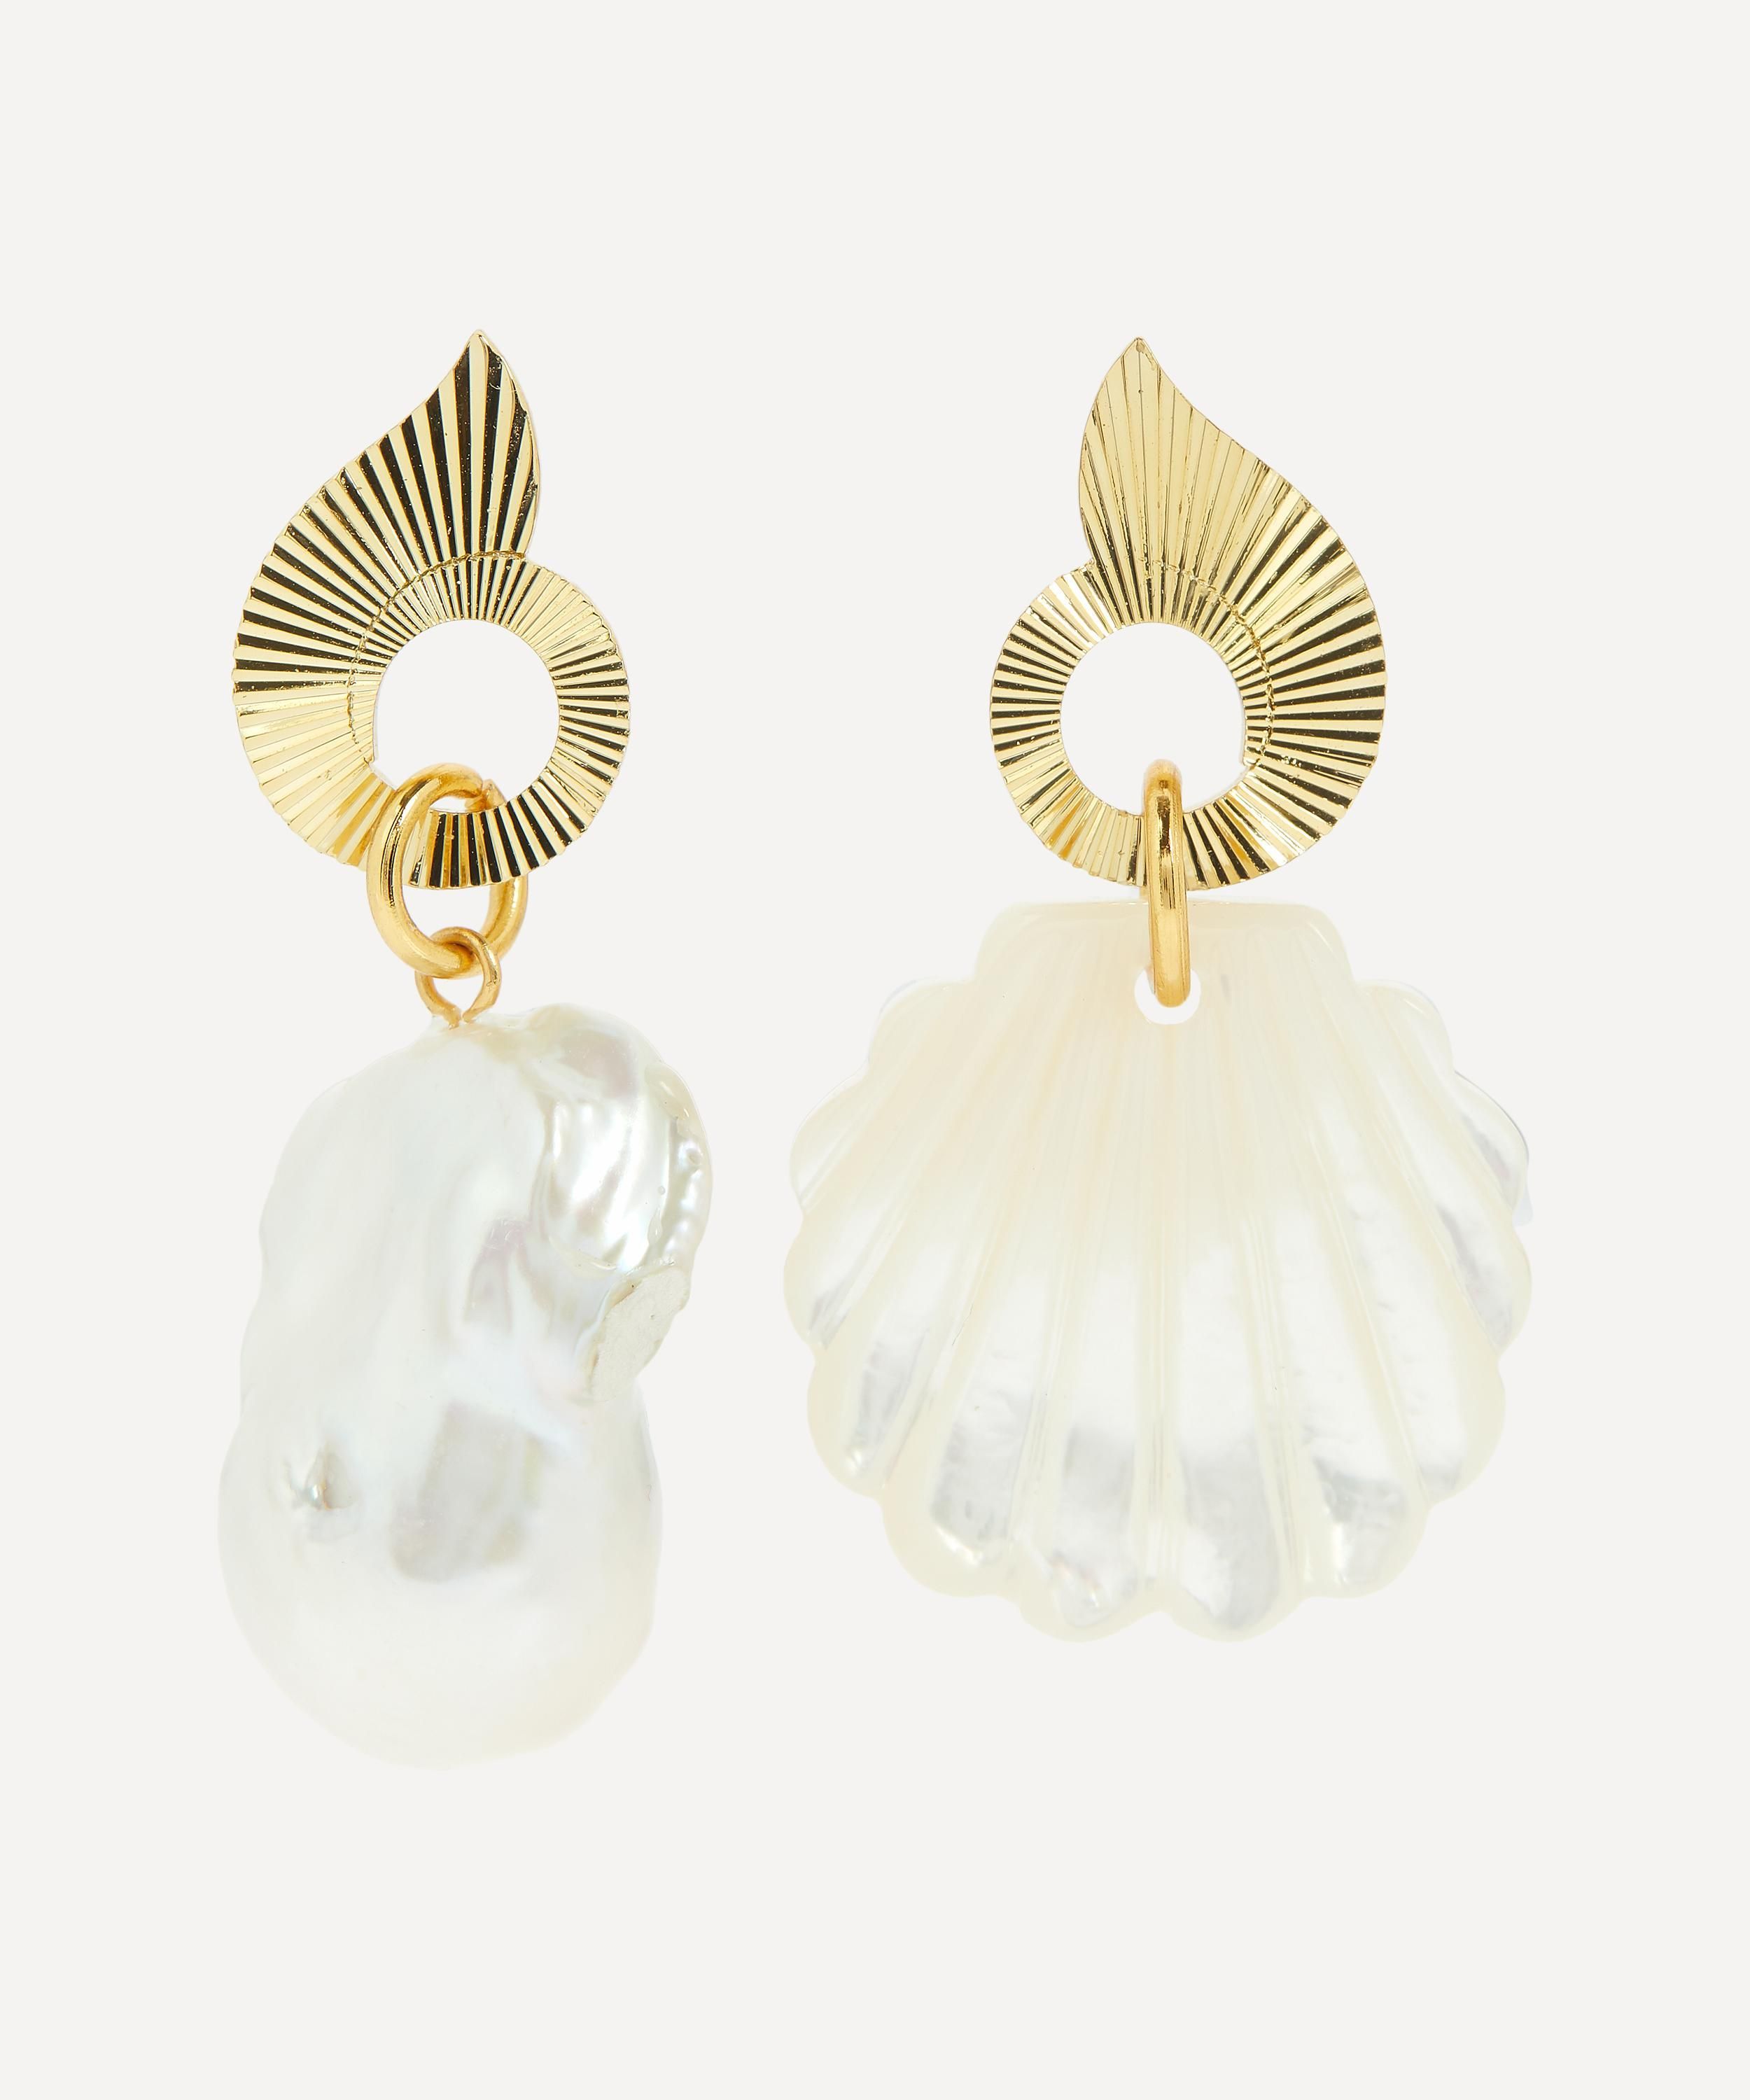 Buy Beach Style Statement Earrings, Gold Sea Shell With White Pearl Earrings,  Island Style Beach Accessories, Shell Earrings Online in India - Etsy